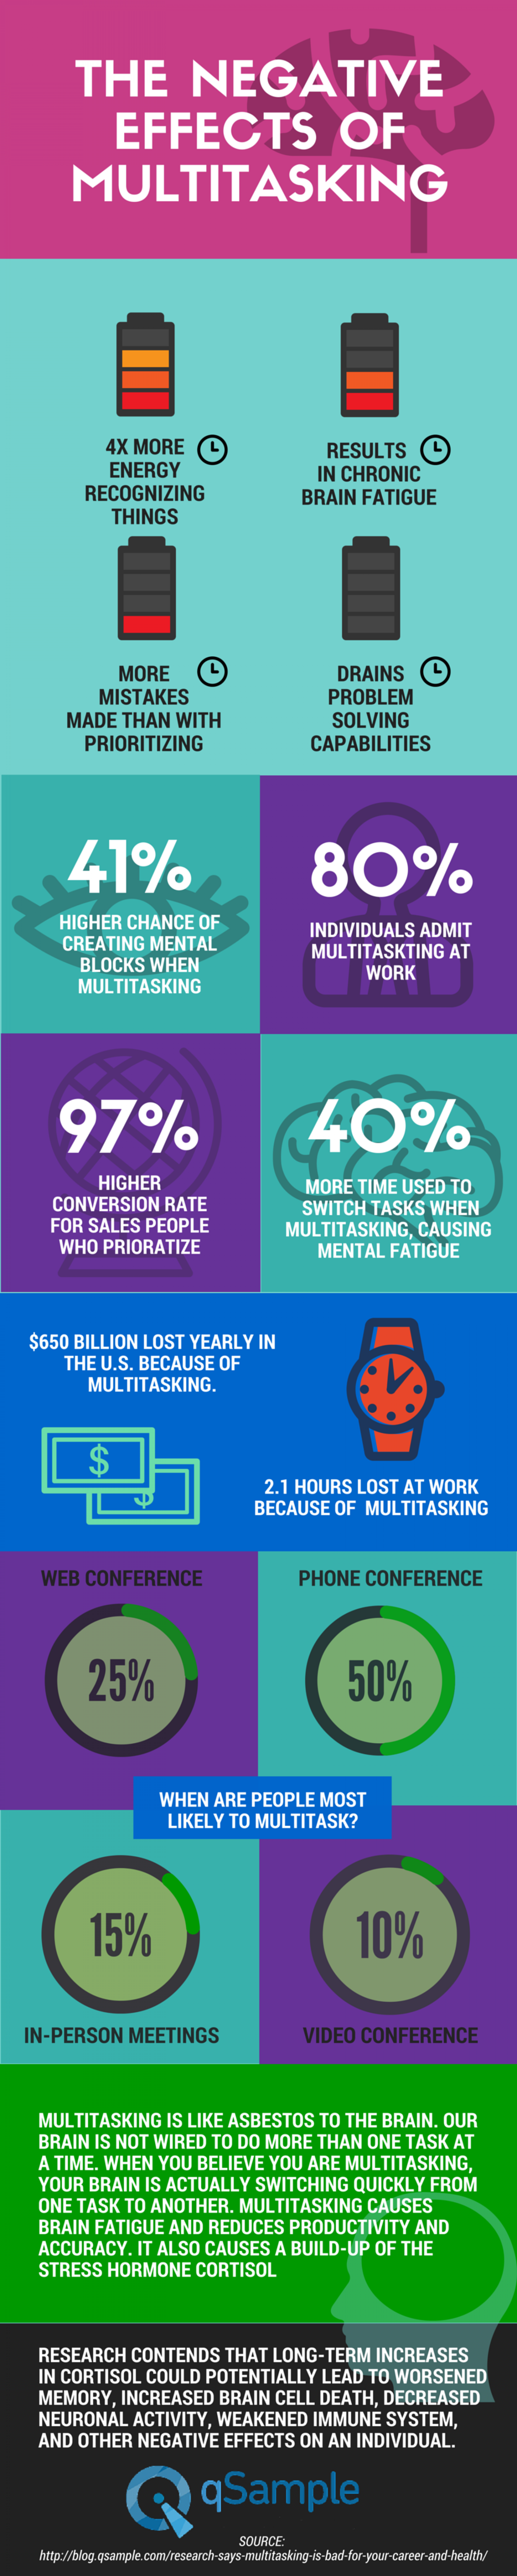 The Negative Effects of Multitasking Infographic